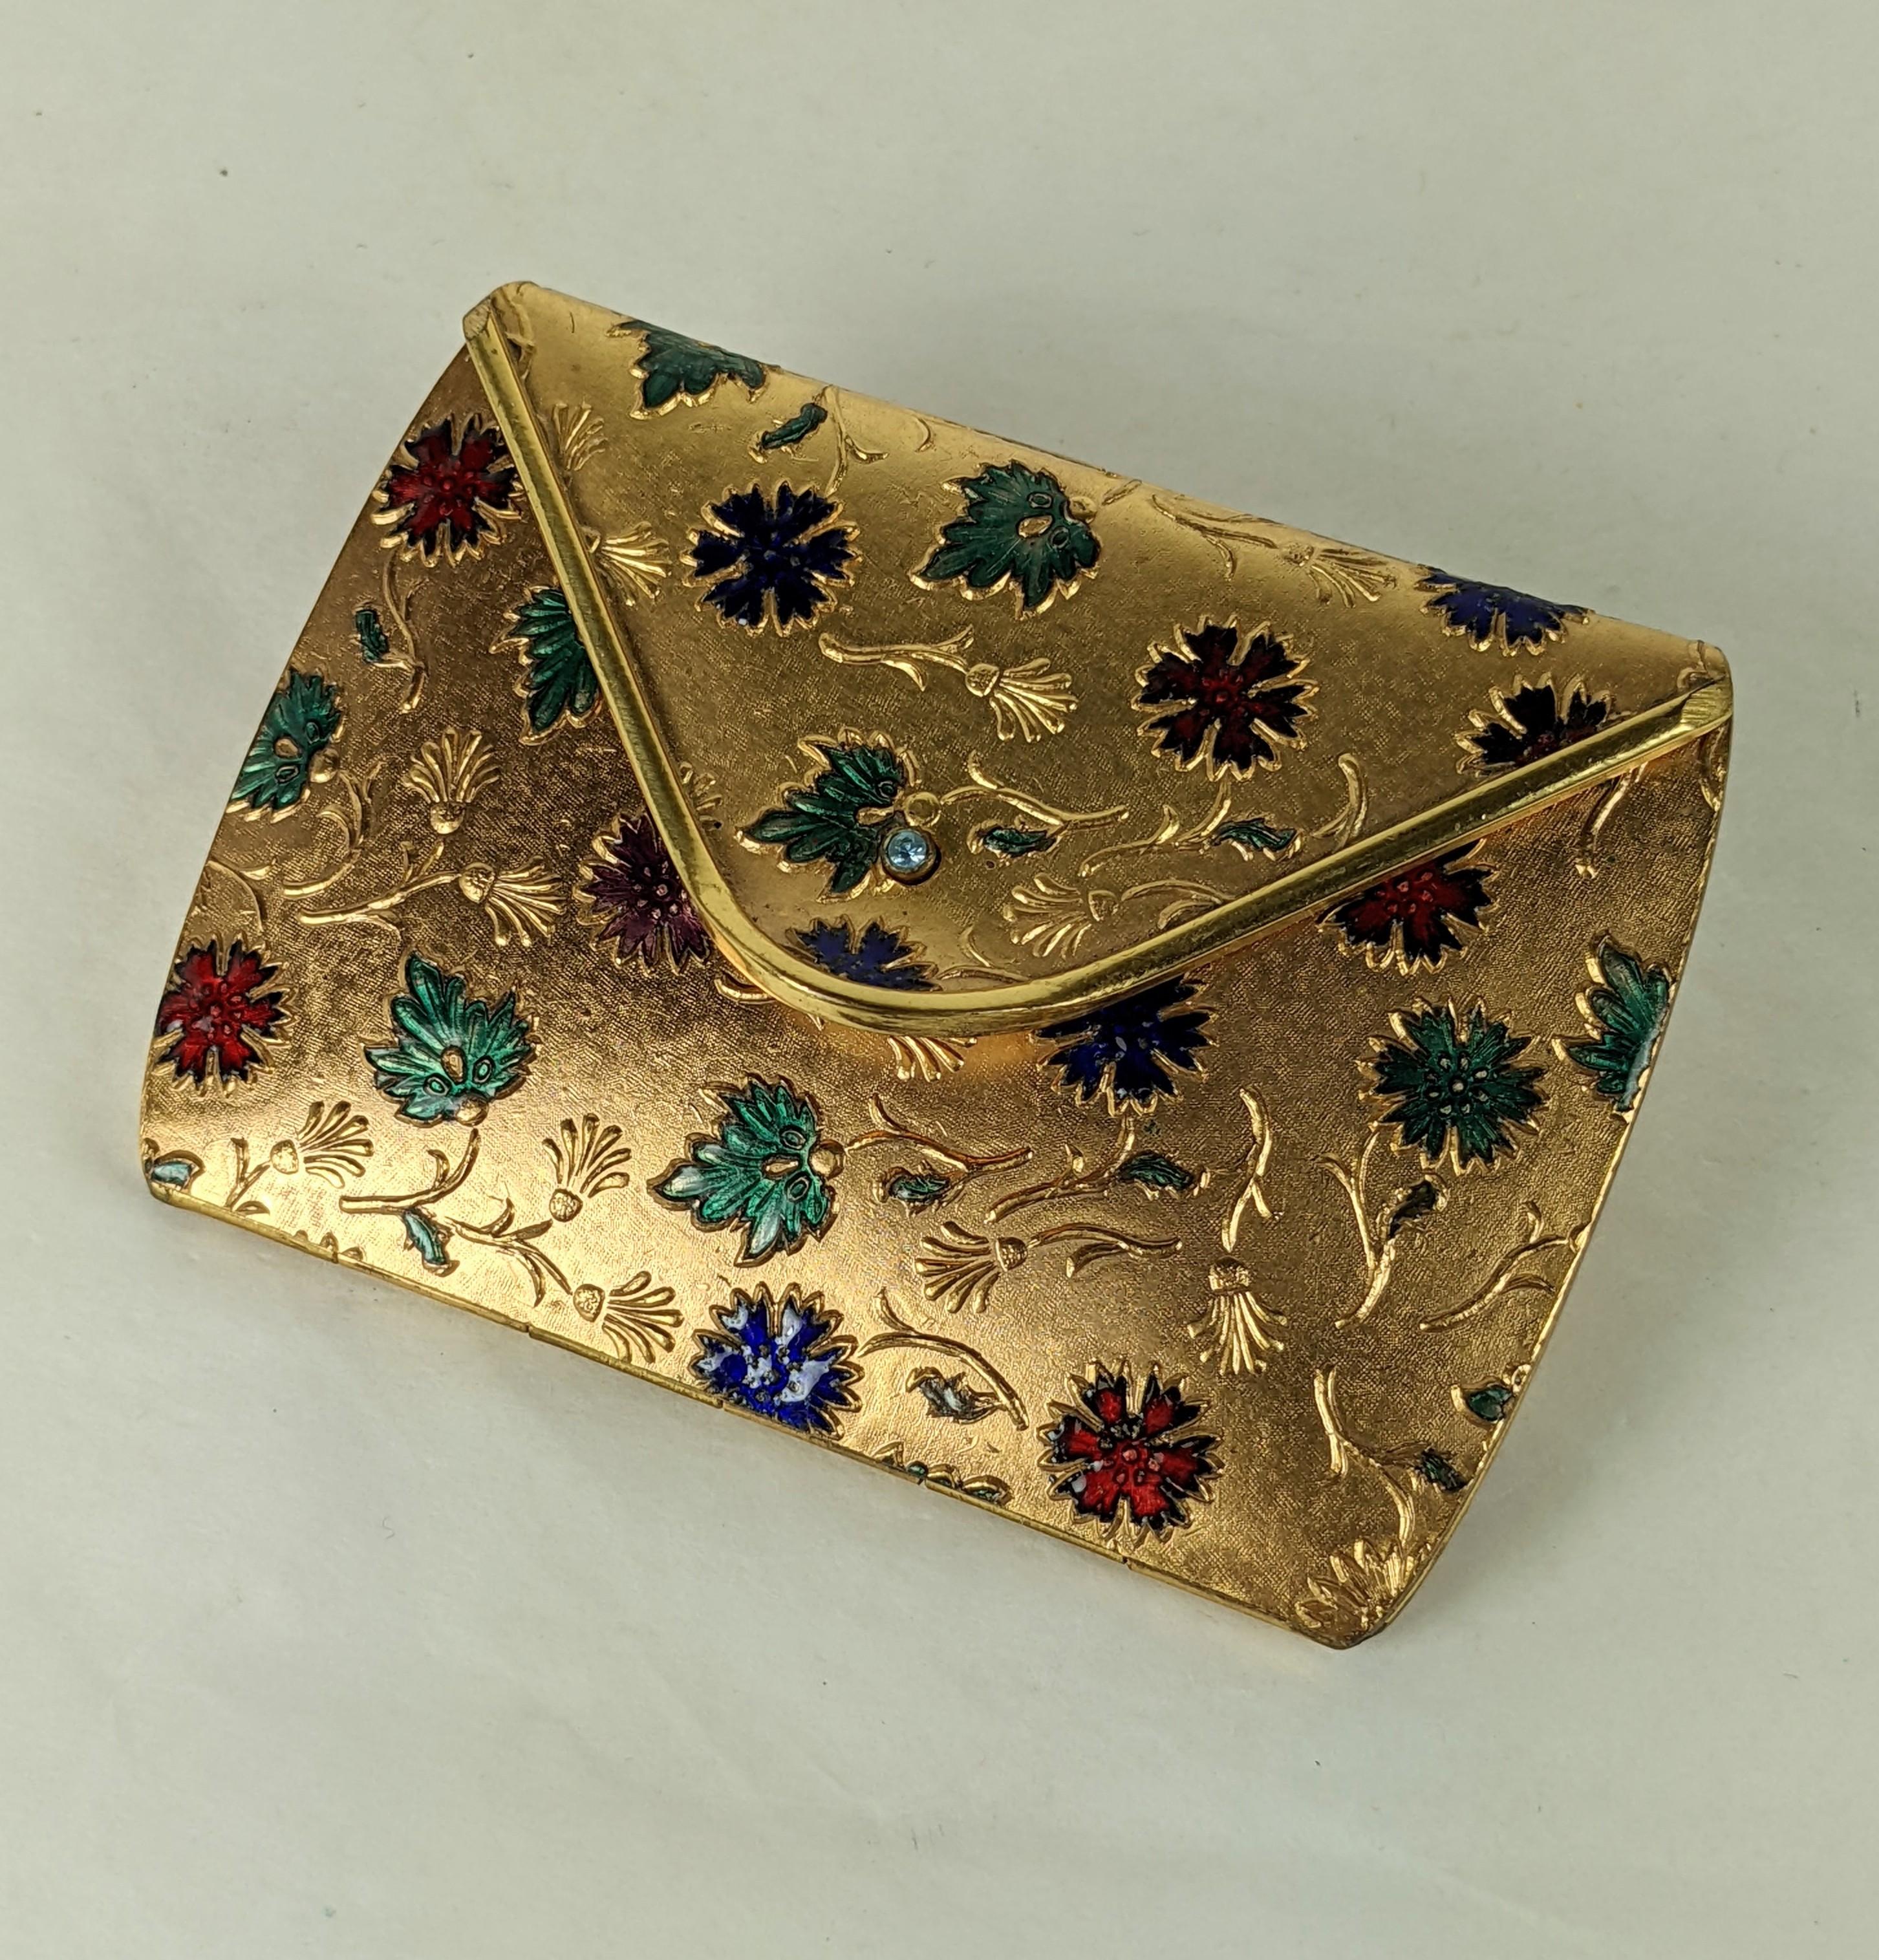 Lovely Italian Floral Enamel Make Up Case by Castelli, Rome. Designed as gilded metal envelope with enameled flowers and leaves. Flap opens to show mirror and compartment for blotting papers. 1960's Italy. 3 3/8